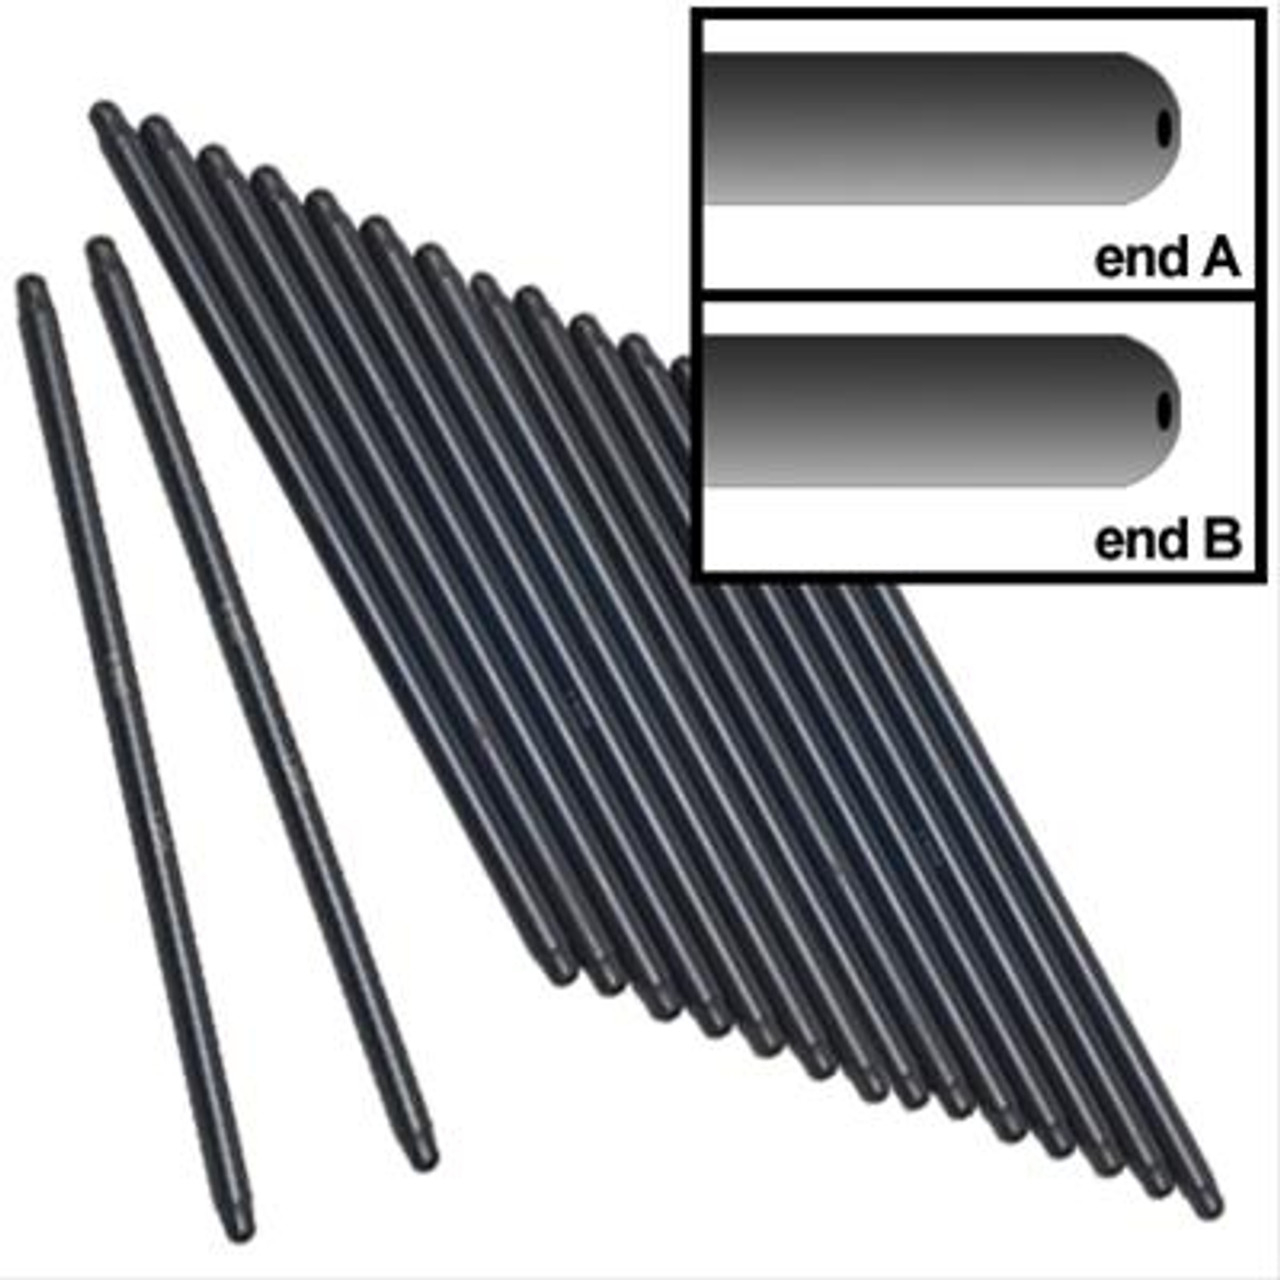 Manley Swedged End Chrome Pushrods 7.400in Lenth .080in Thickness 5/16in Diameter (Set of 16) - 25735-16